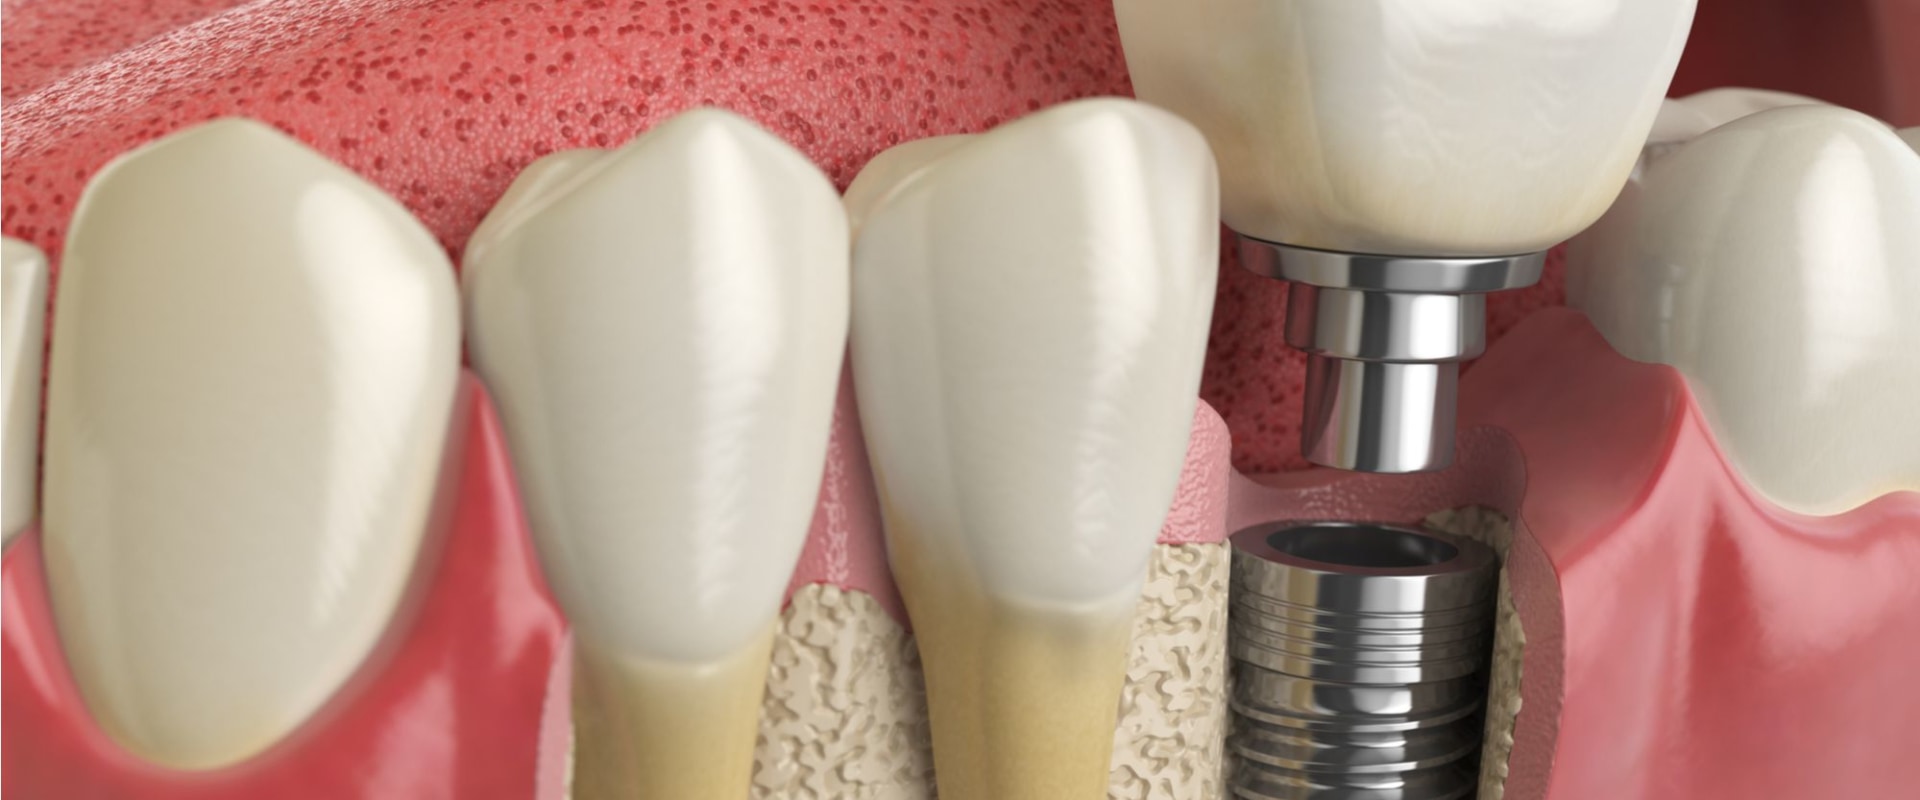 What is the code for dental implants?